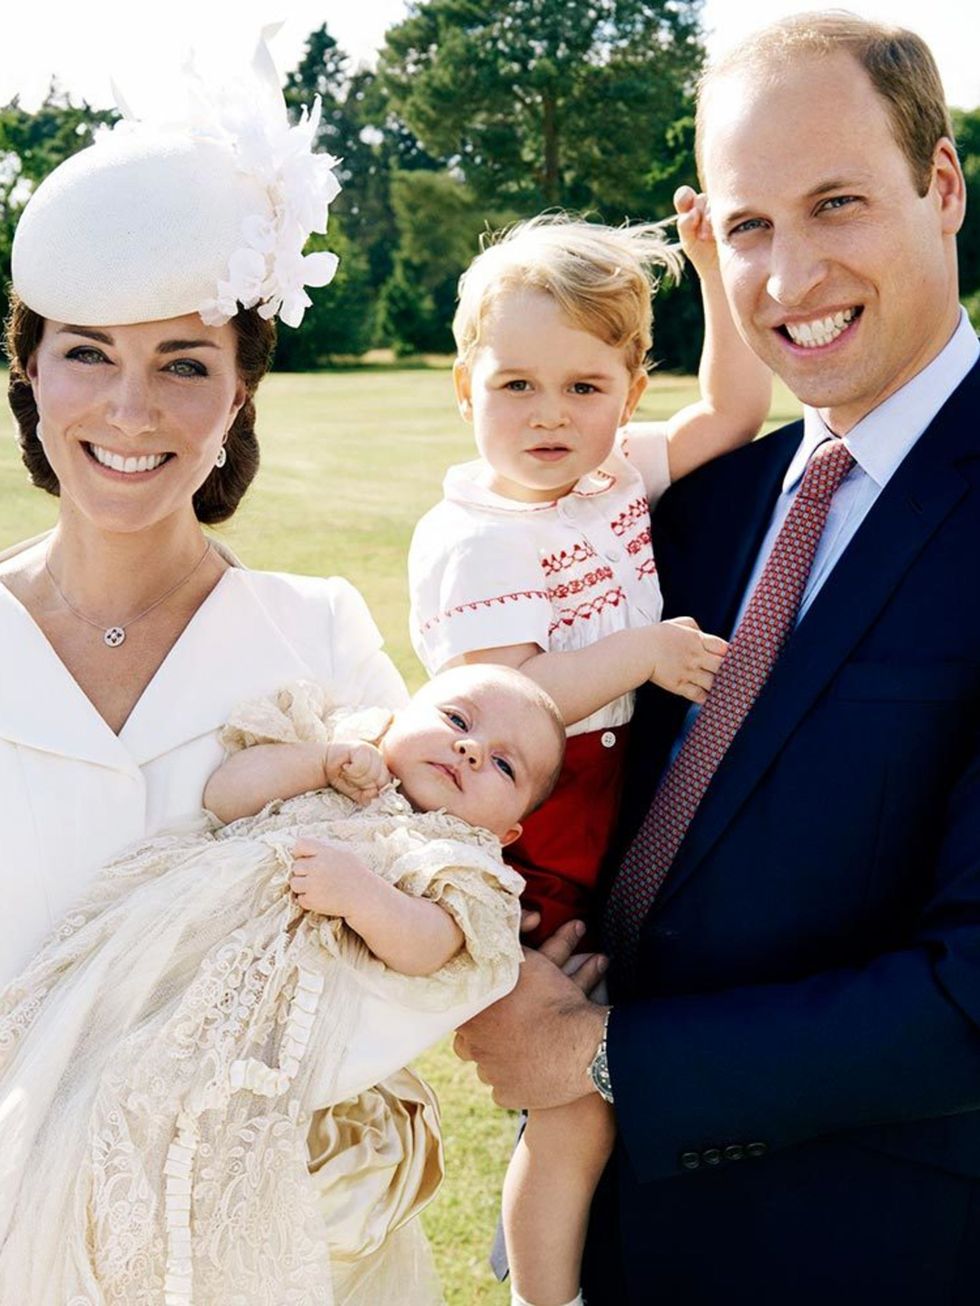 Kate, William and Charlotte in an official portrait by Mario Testino.